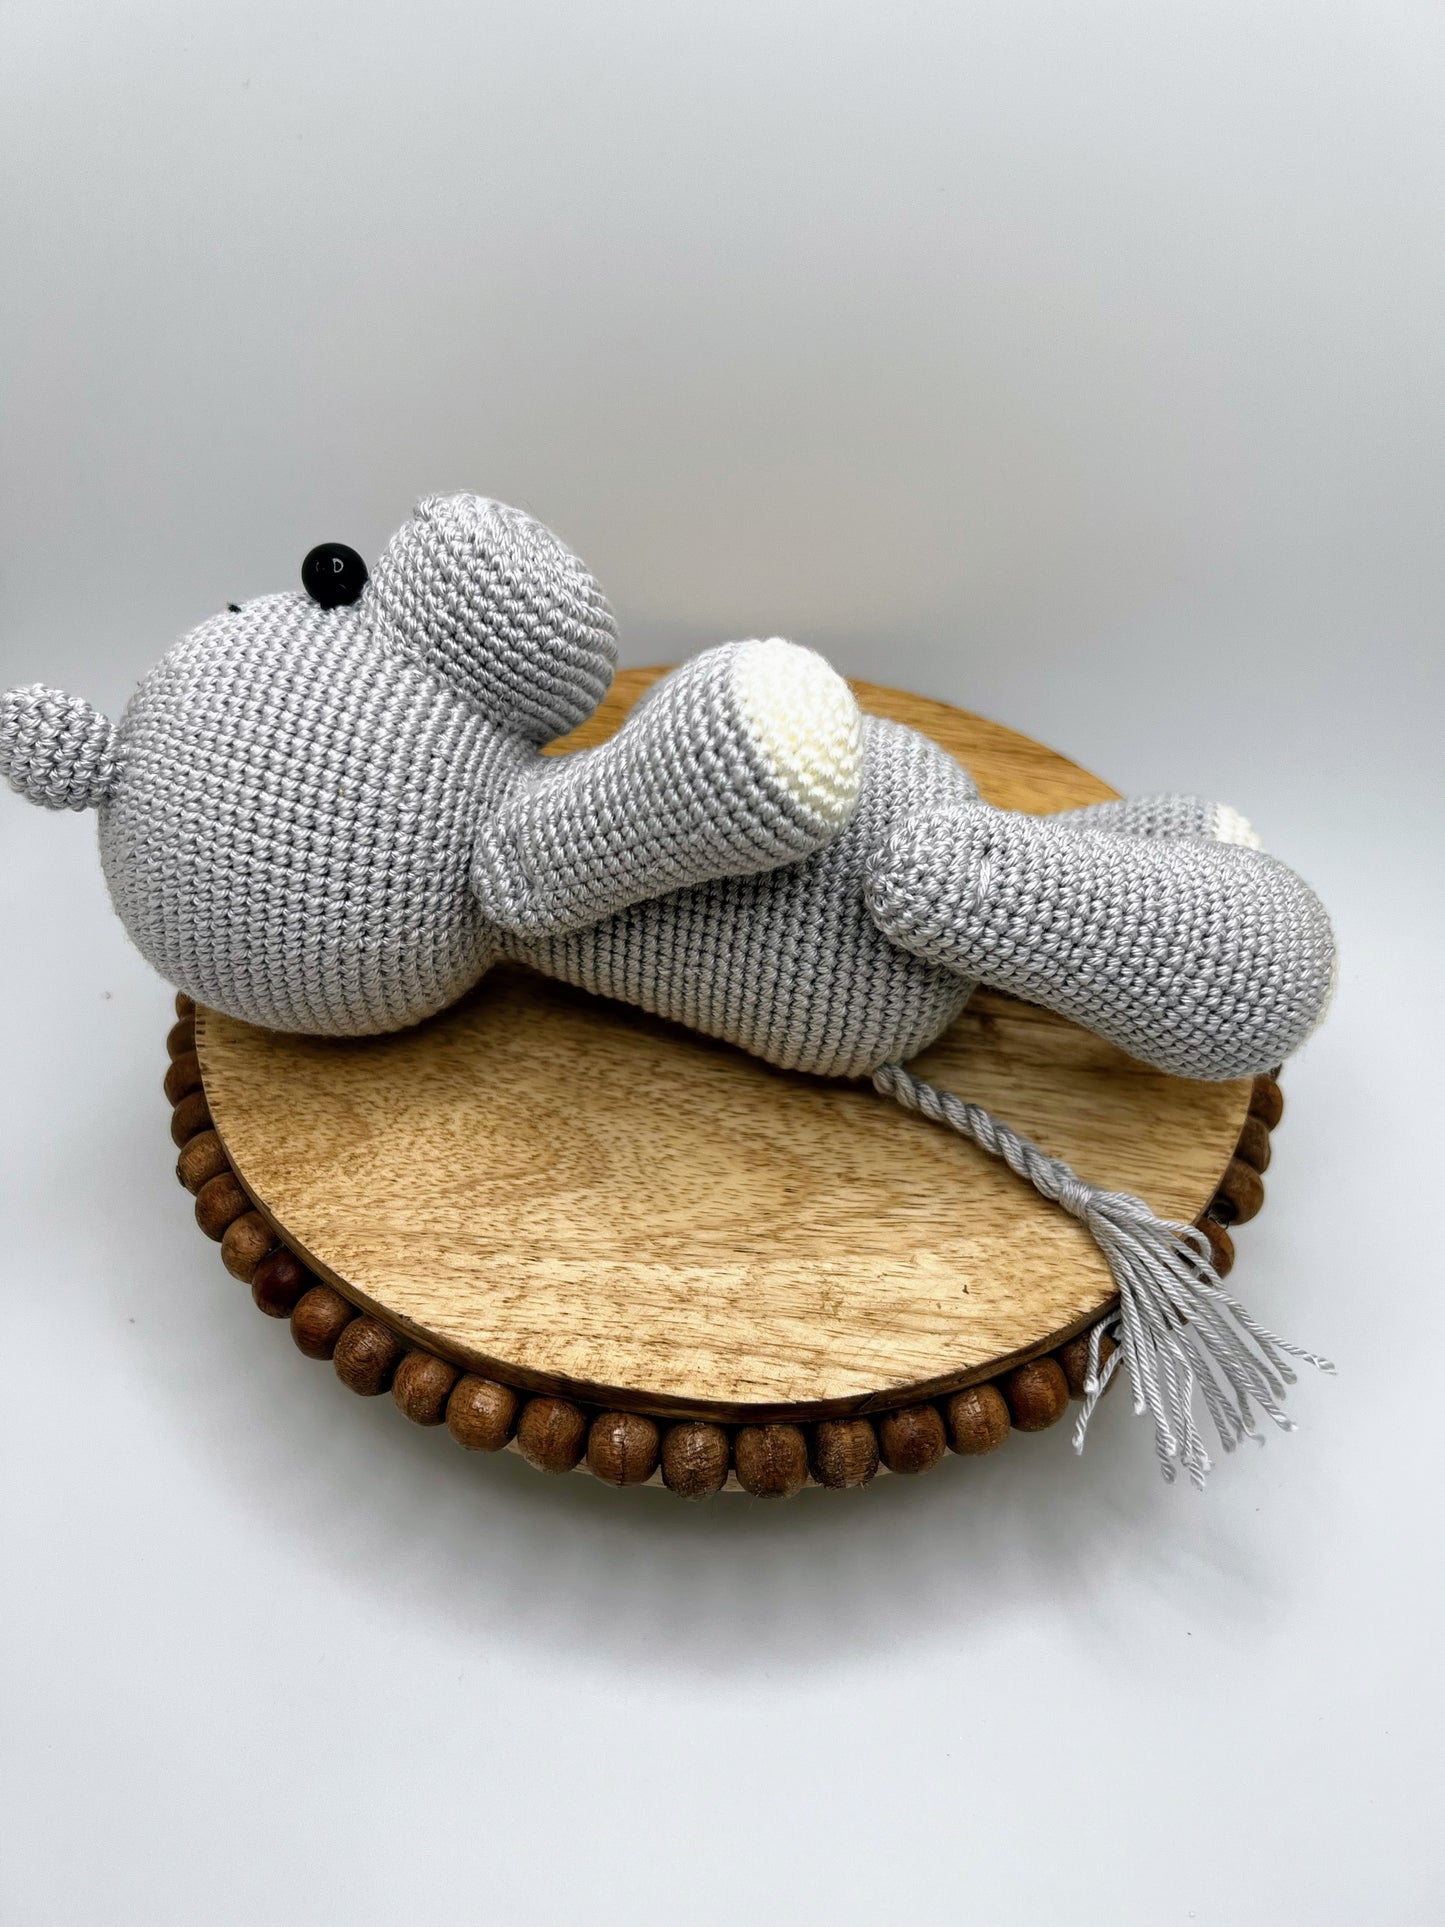 Stuffed Hippo Toy With Moving Legs - Crochet Knitted Amigurumi Toy